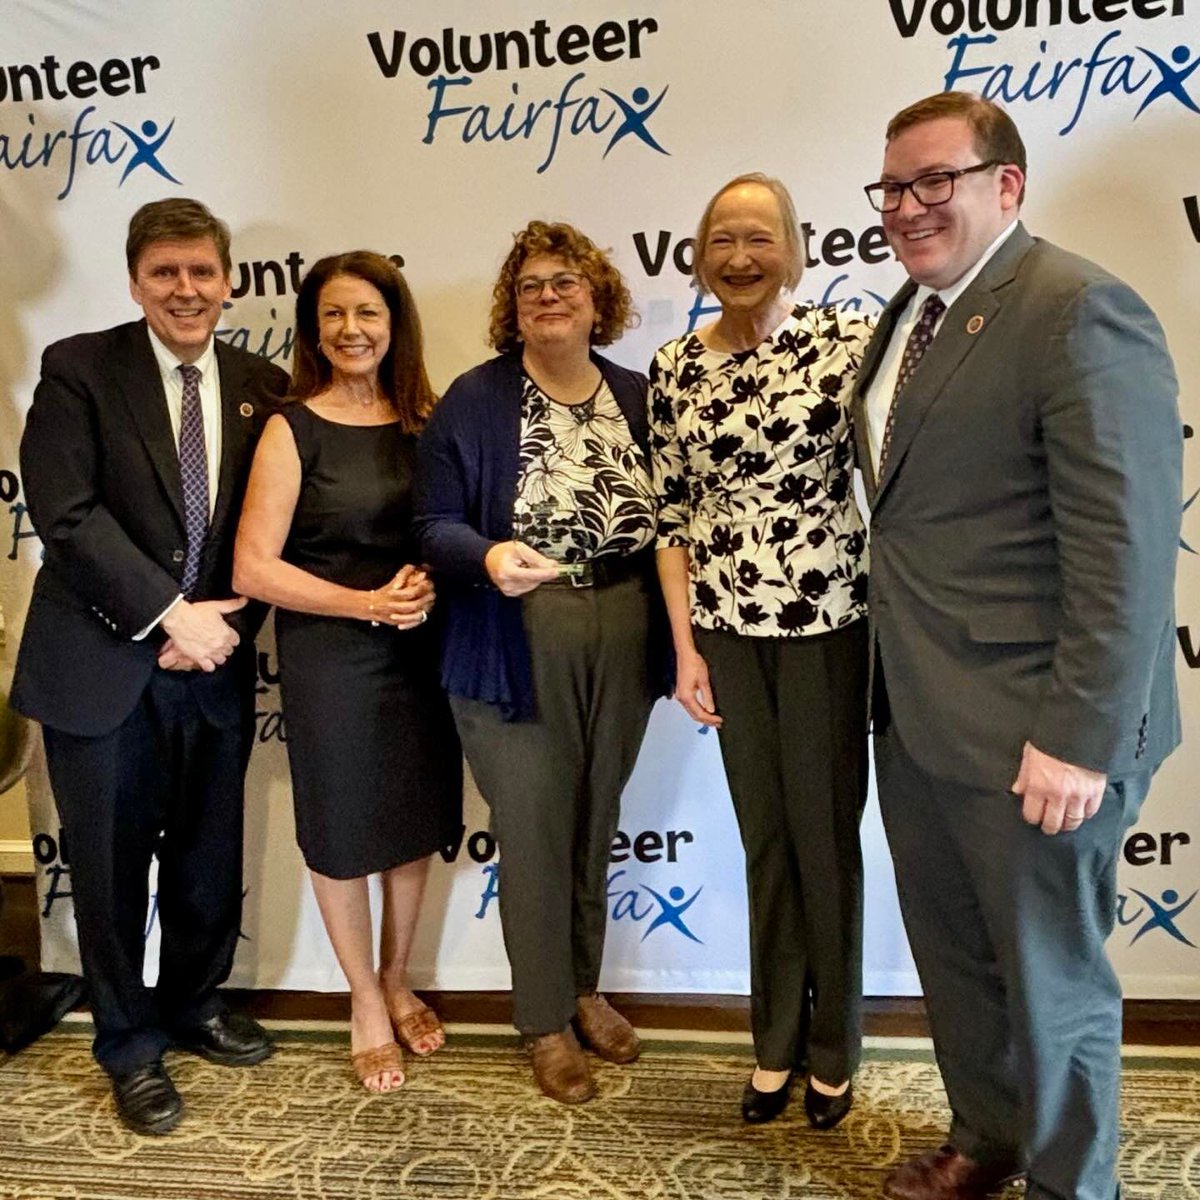 Dr. Eric Goplerud and @FoodforNeighbor were honored with @VolunteerFFX Service Awards for their outstanding work. Food for Neighbors won the program of the year award & recently collected over 25,000 pounds of food for students. Goplerud stands out as an environmental champion.